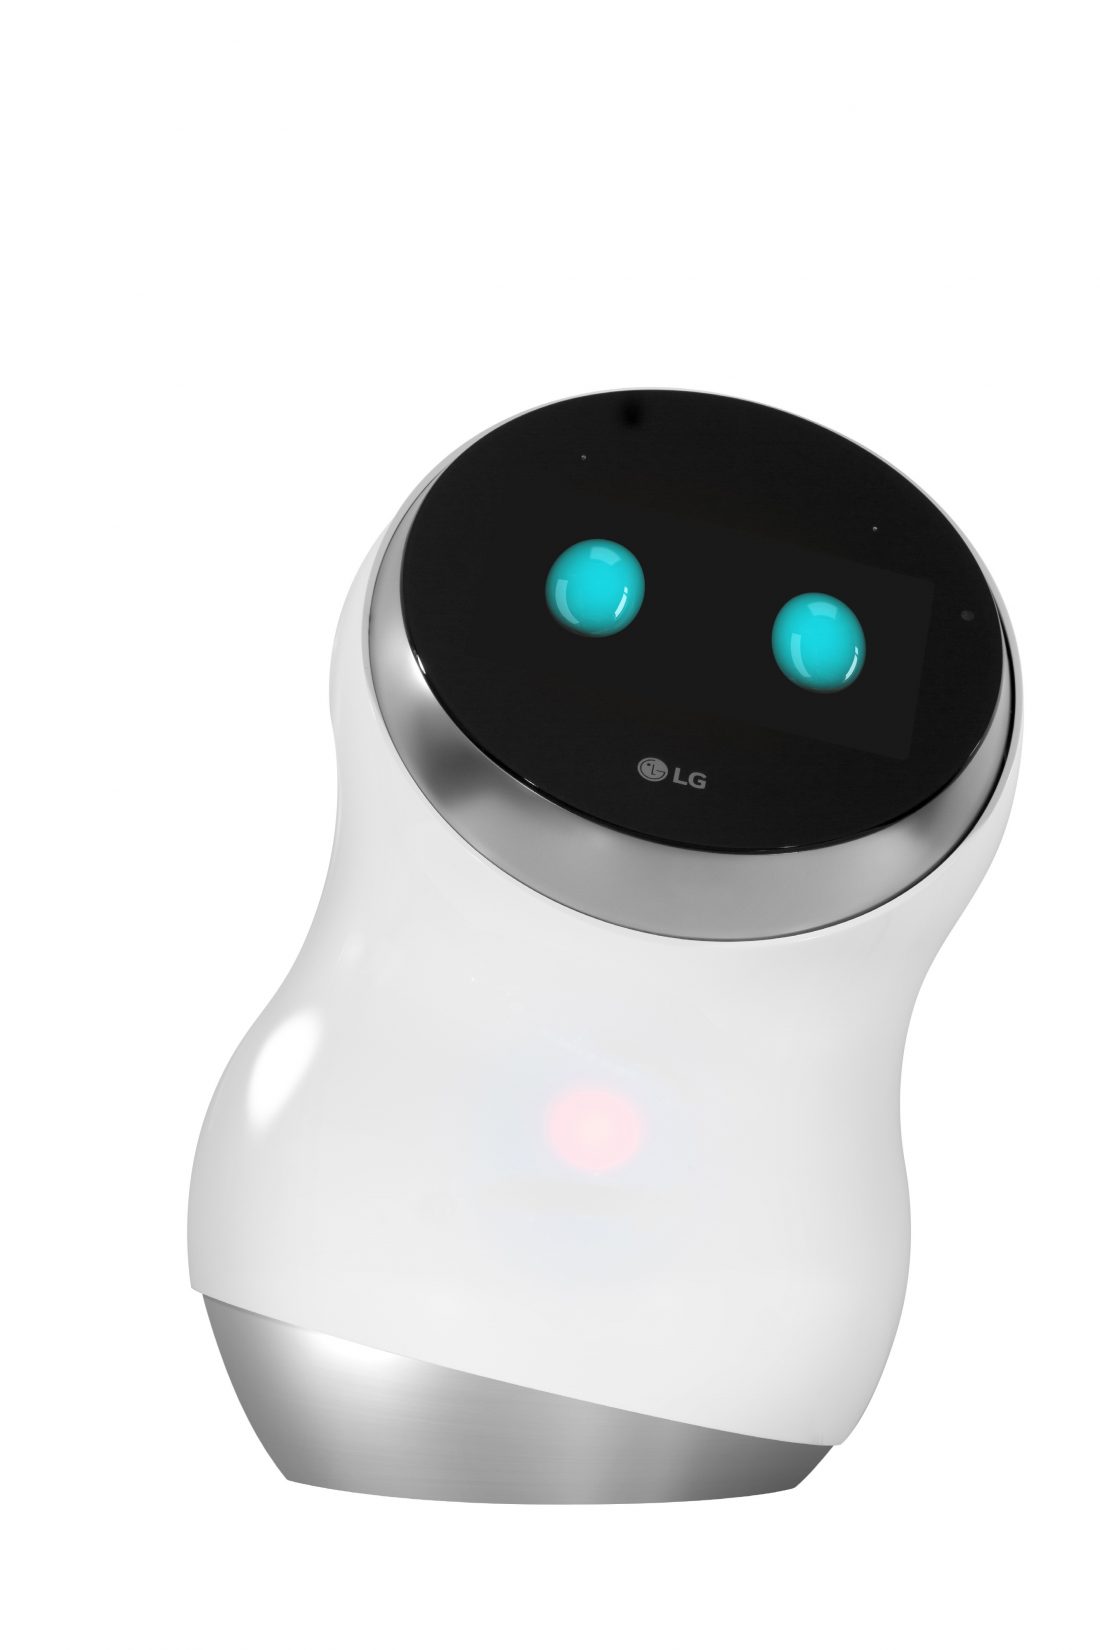 Front view of LG's CLOi hub robot leaning over to the right